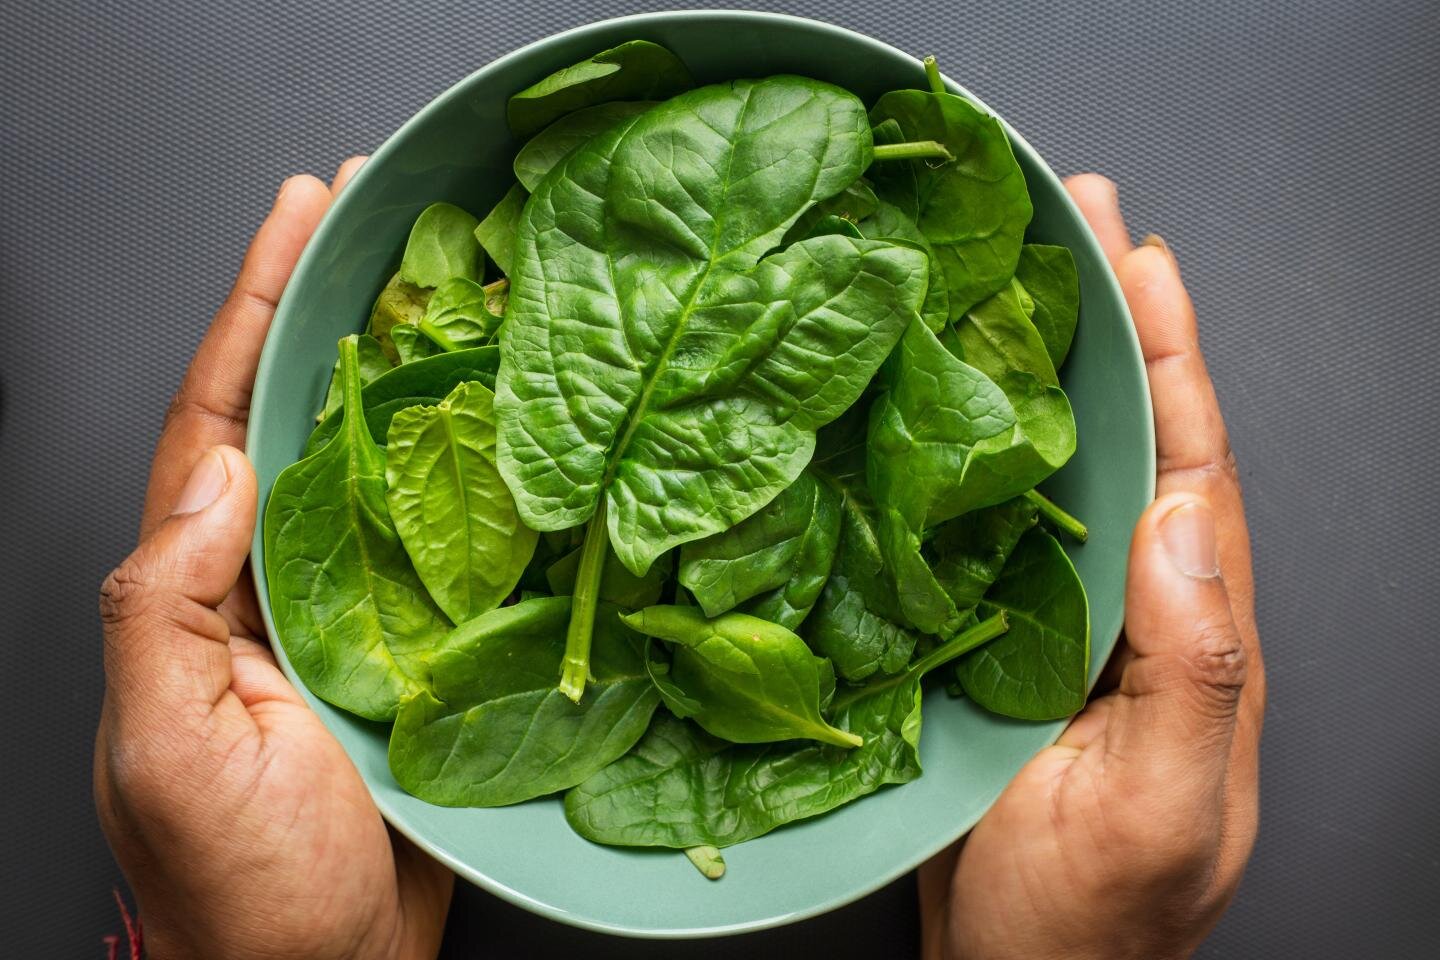 Green leafy vegetables essential for muscle strength